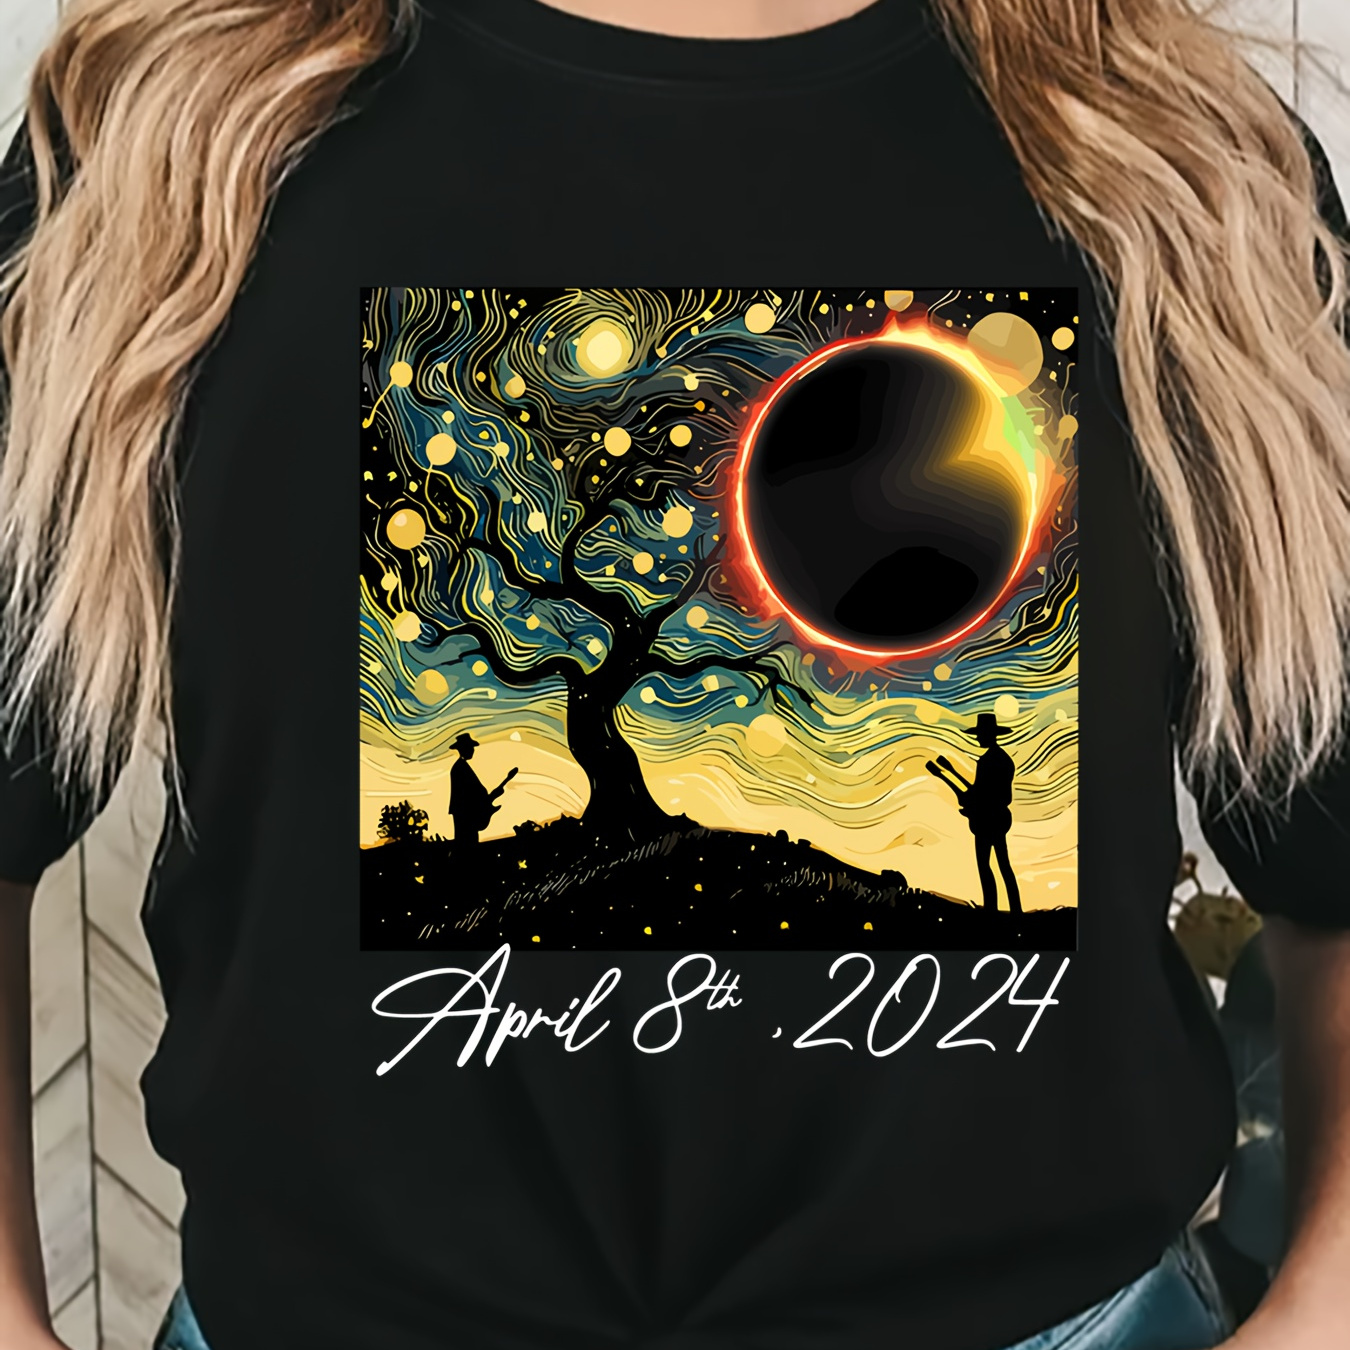 

Plus Size Eclipse Print T-shirt, Casual Short Sleeve Crew Neck Top For Spring & Summer, Women's Plus Size Clothing